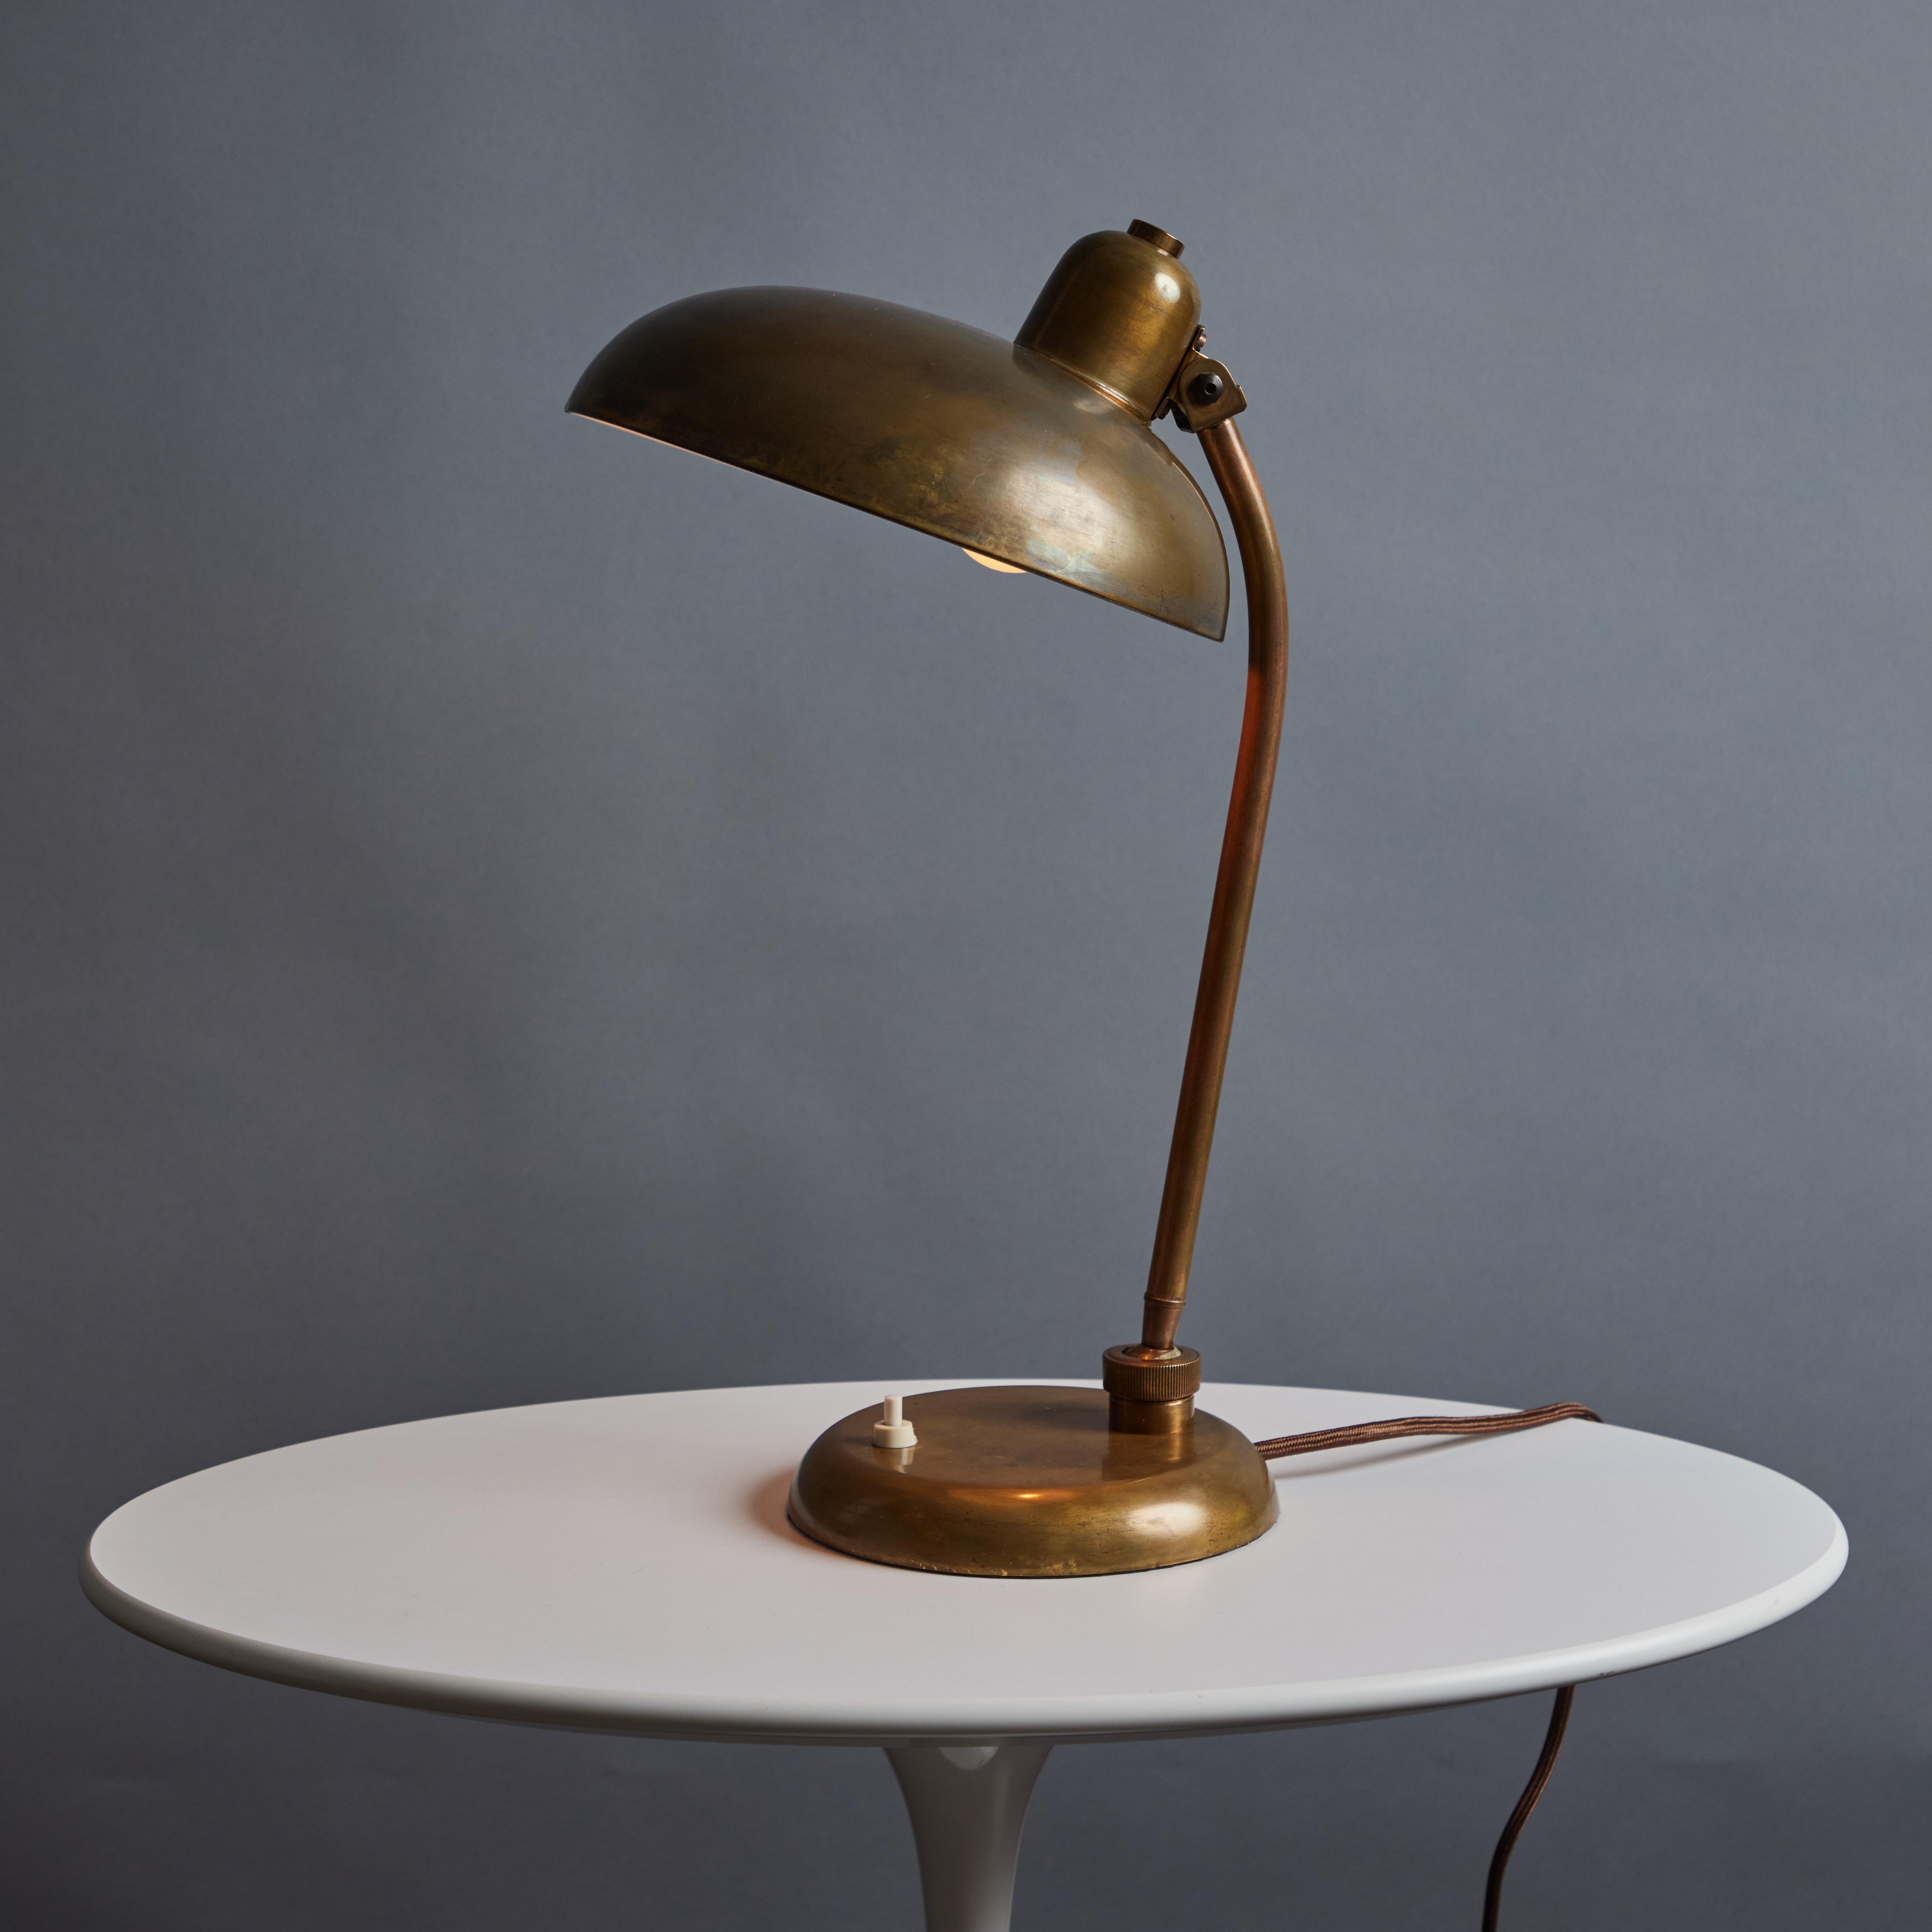 Scandinavian Modern 1940s Giovanni Michelucci Brass Ministerial Table Lamp for Lariolux For Sale